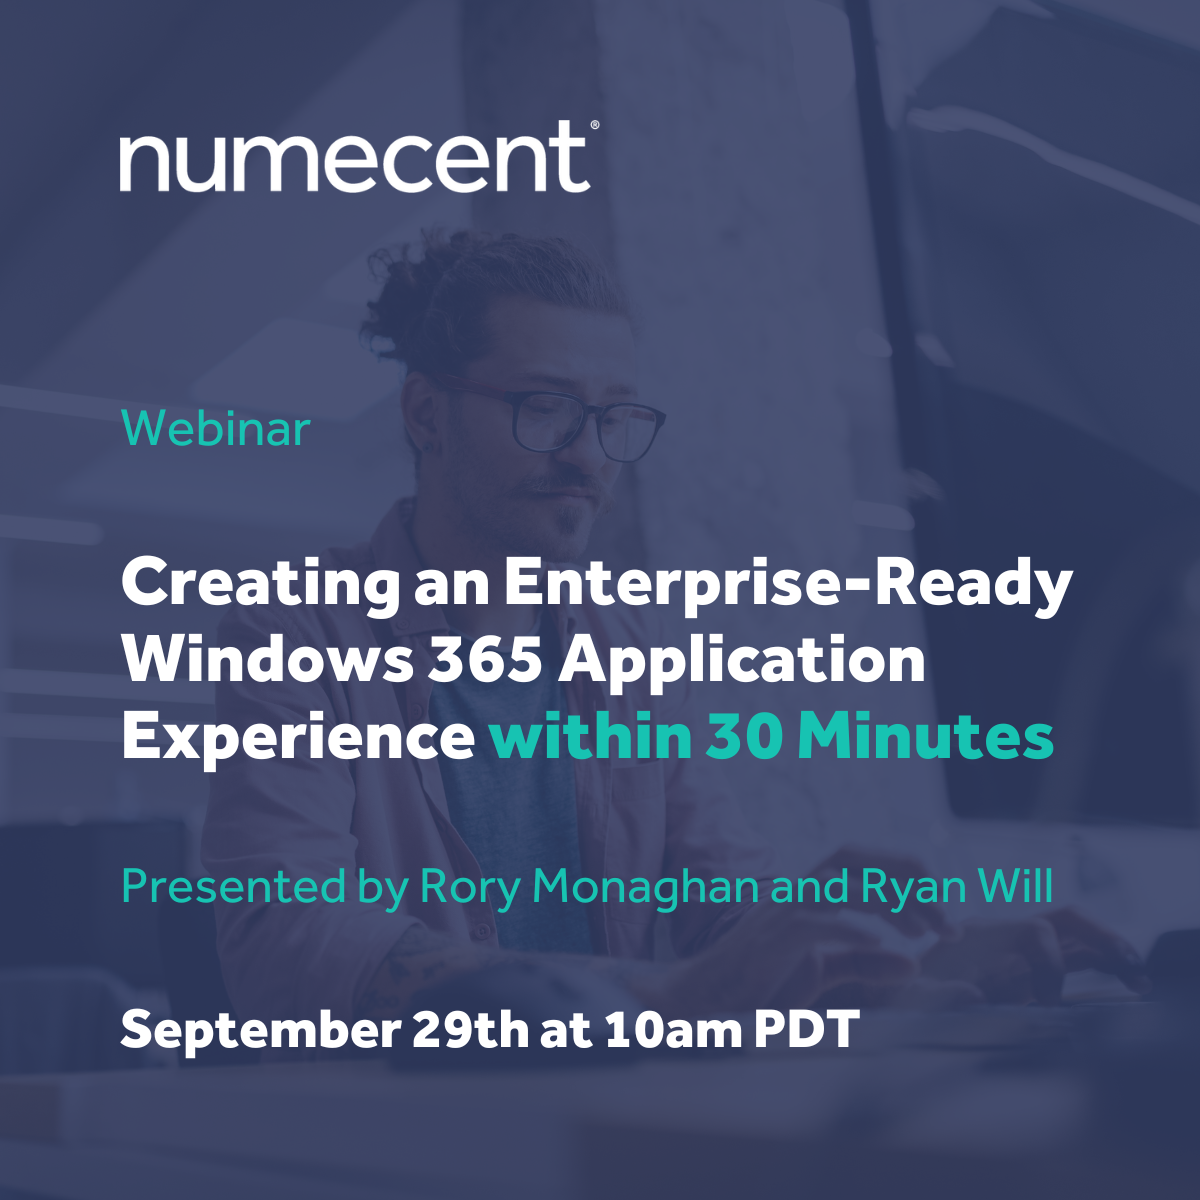 Webinar Title: Creating an enterprise-ready Windows 365 application experience within 30 minutes